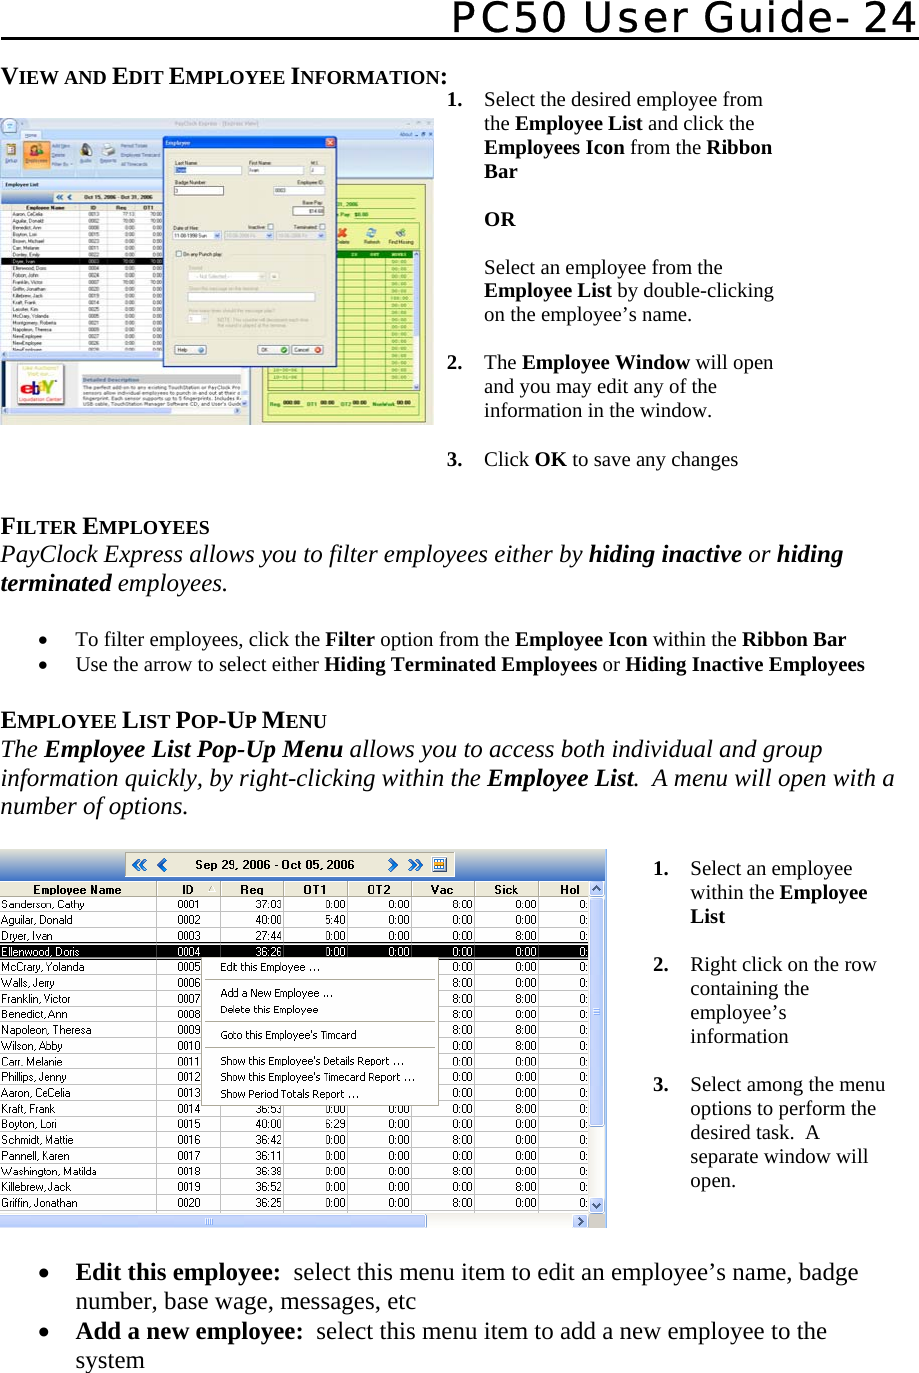   PC50 User Guide- 24   1. Select the desired employee from the Employee List and click the Employees Icon from the Ribbon Bar   OR  Select an employee from the  Employee List by double-clicking on the employee’s name.    2. The Employee Window will open and you may edit any of the information in the window.    3. Click OK to save any changes VIEW AND EDIT EMPLOYEE INFORMATION:      FILTER EMPLOYEES PayClock Express allows you to filter employees either by hiding inactive or hiding terminated employees.  • To filter employees, click the Filter option from the Employee Icon within the Ribbon Bar • Use the arrow to select either Hiding Terminated Employees or Hiding Inactive Employees   EMPLOYEE LIST POP-UP MENU The Employee List Pop-Up Menu allows you to access both individual and group information quickly, by right-clicking within the Employee List.  A menu will open with a number of options.    • Edit this employee:  select this menu item to edit an employee’s name, badge number, base wage, messages, etc • Add a new employee:  select this menu item to add a new employee to the system 1. Select an employee within the Employee List  2. Right click on the row containing the employee’s information  3. Select among the menu options to perform the desired task.  A separate window will open. 